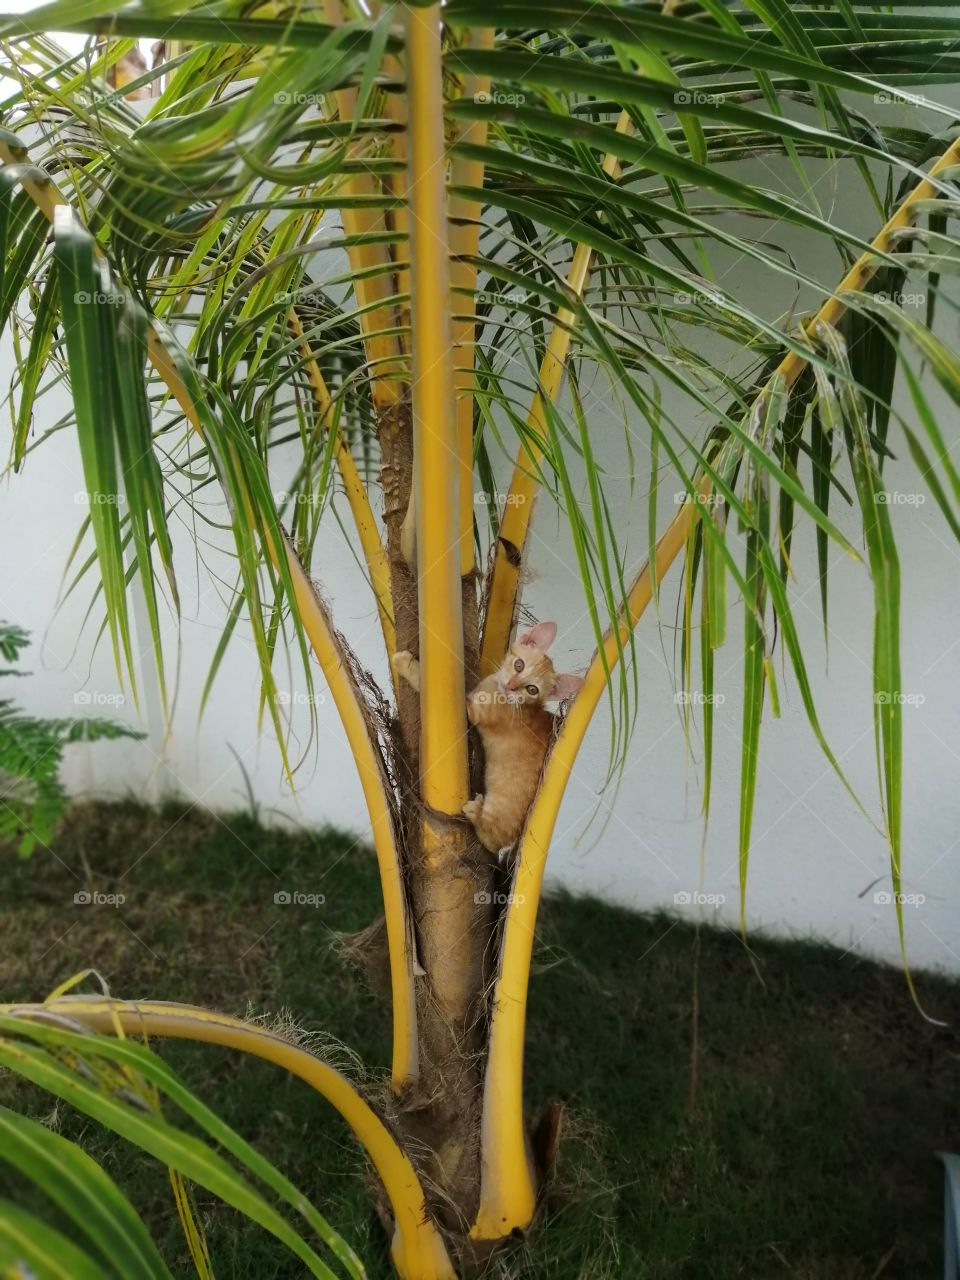 The little kitten is going up on the young coconut plant. She like to play up and down. She looks like a model in my garden.